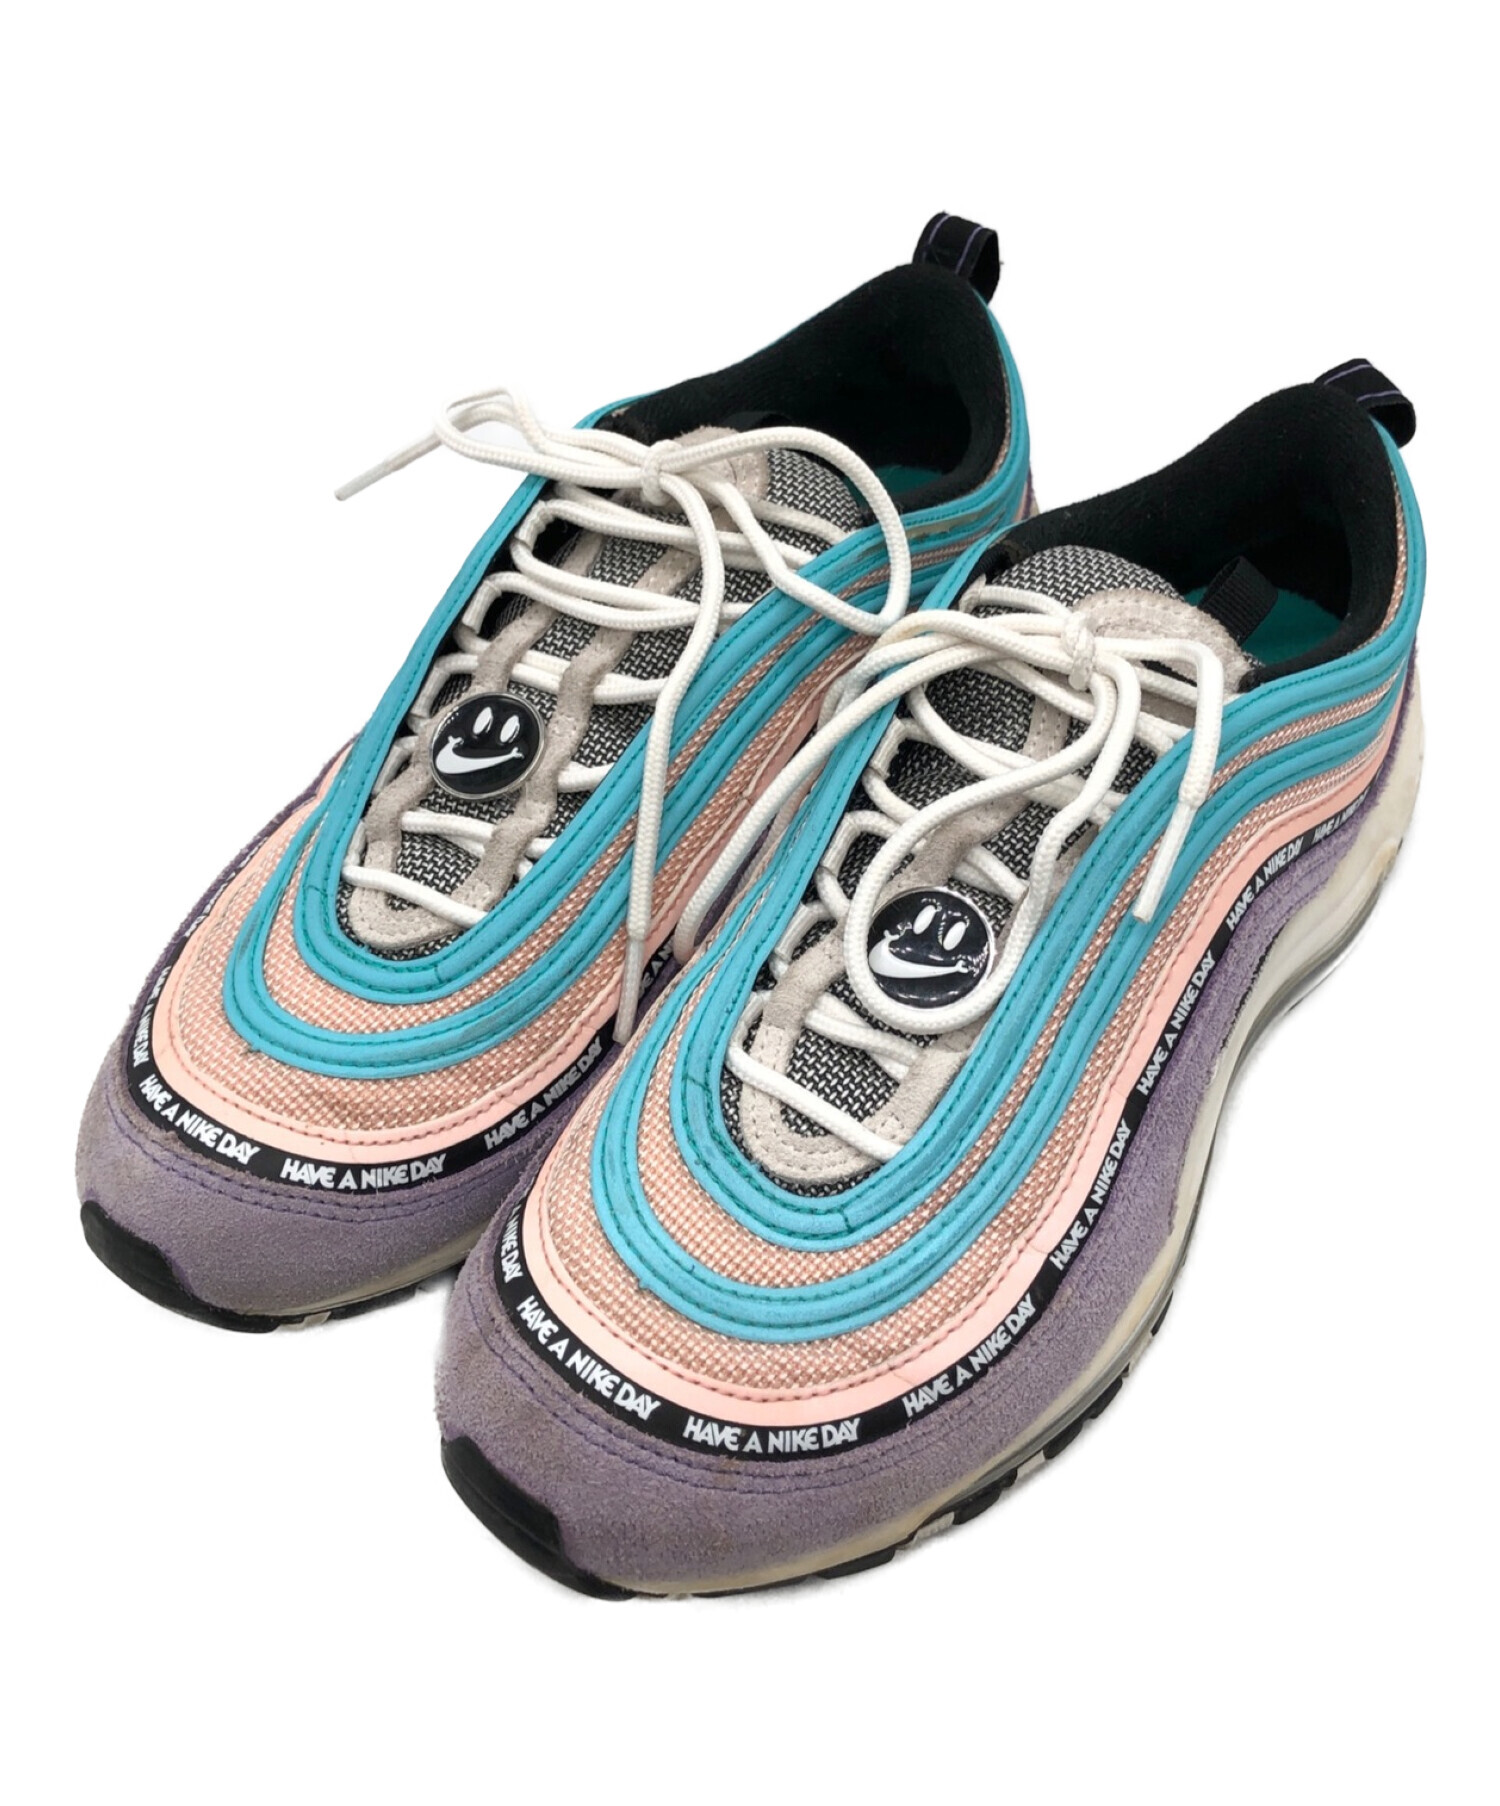 NIKE AIR MAX 97 SE GS HAVE A NIKE DAY